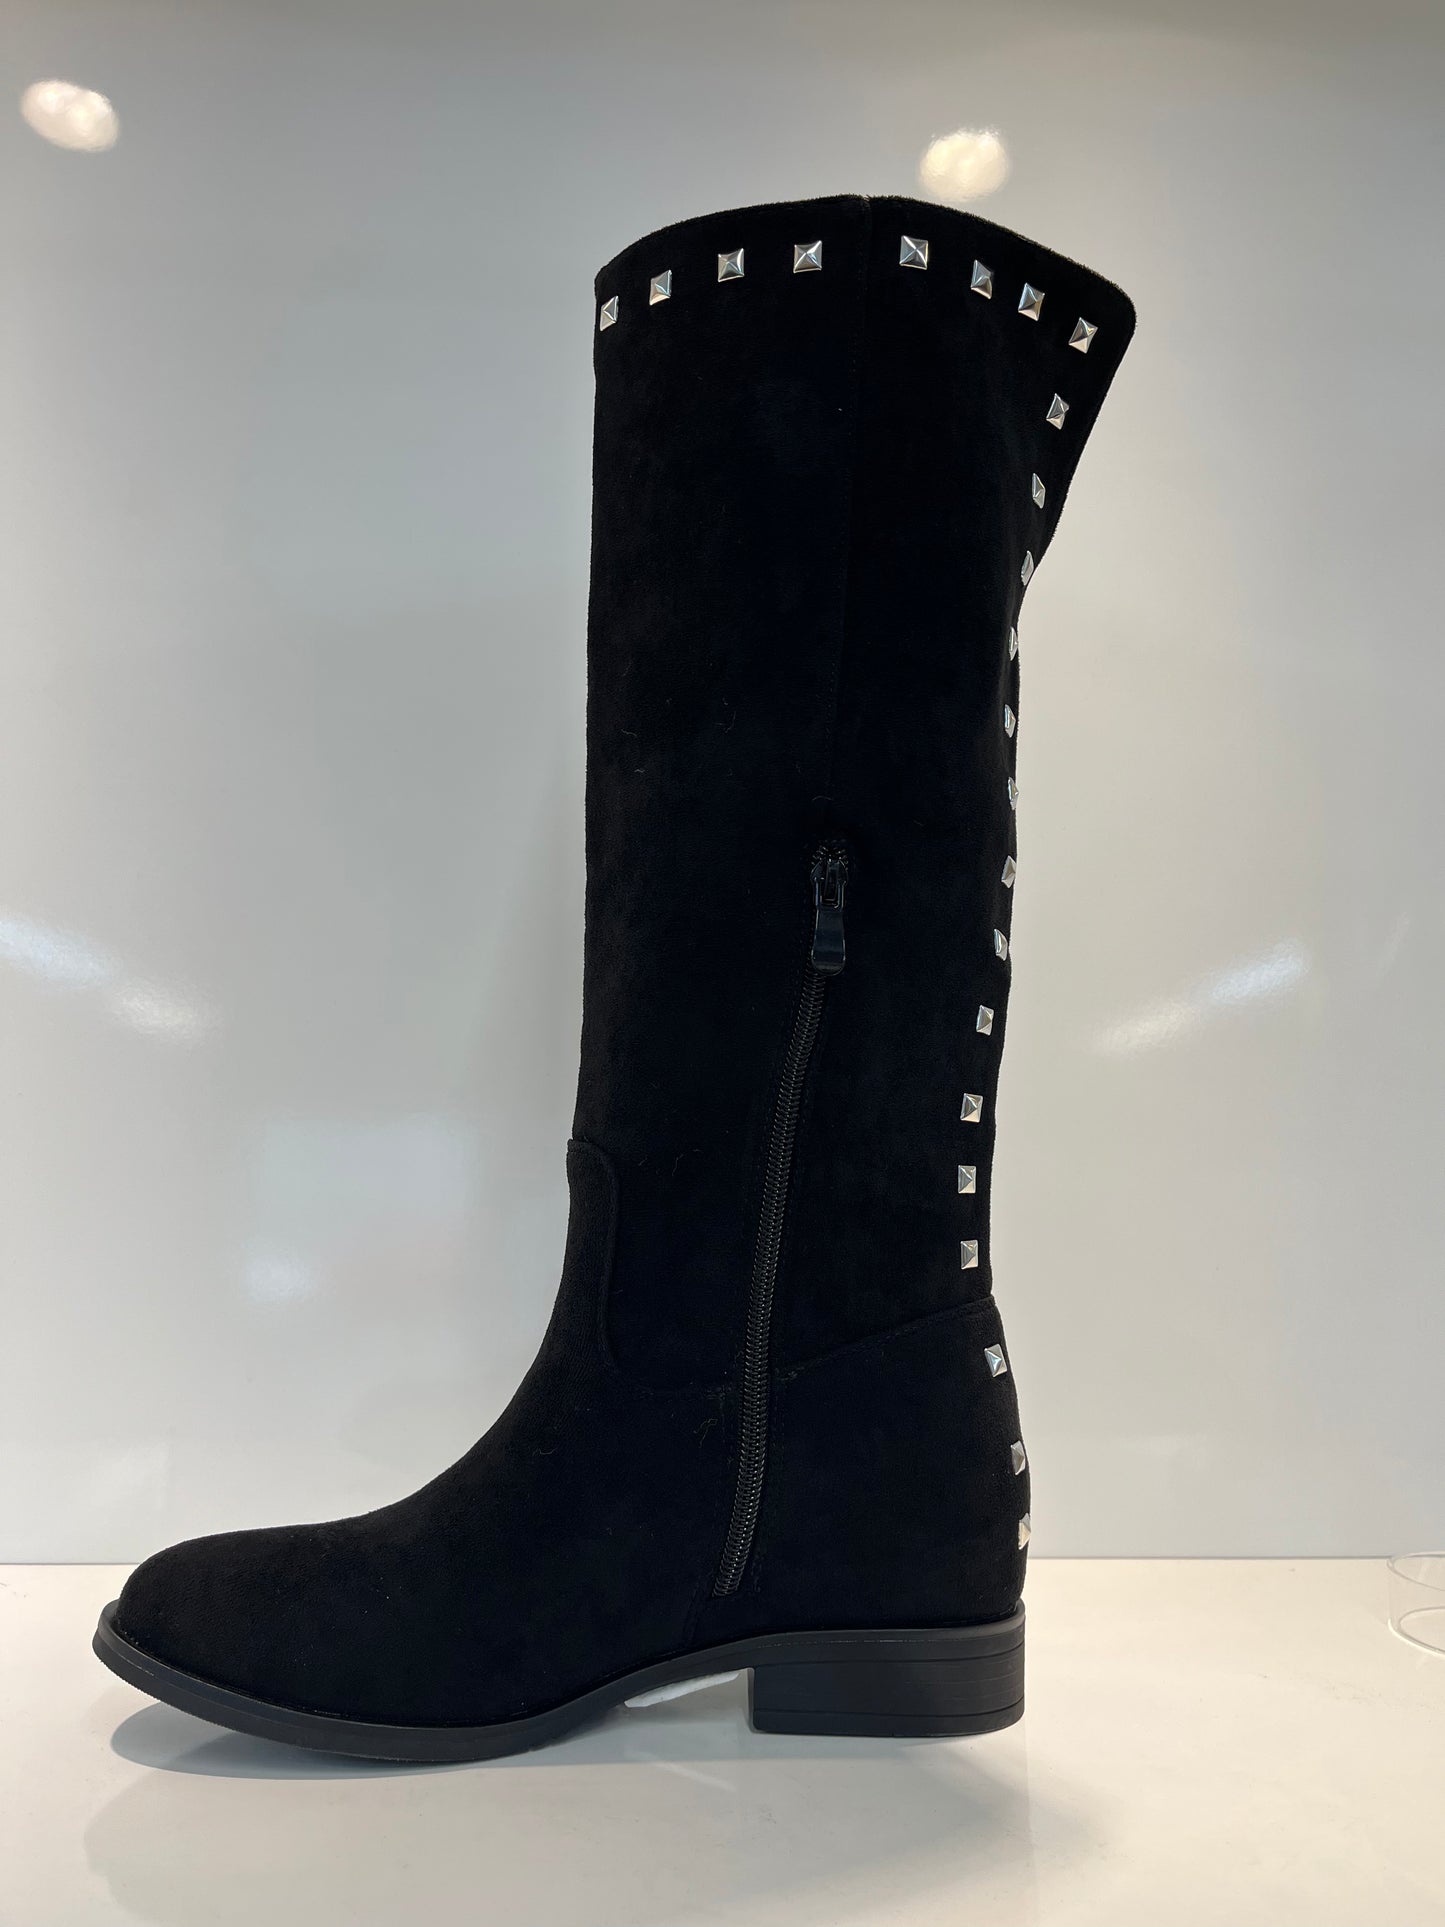 BLACK SILVER STUD KNEE HIGH BOOTS